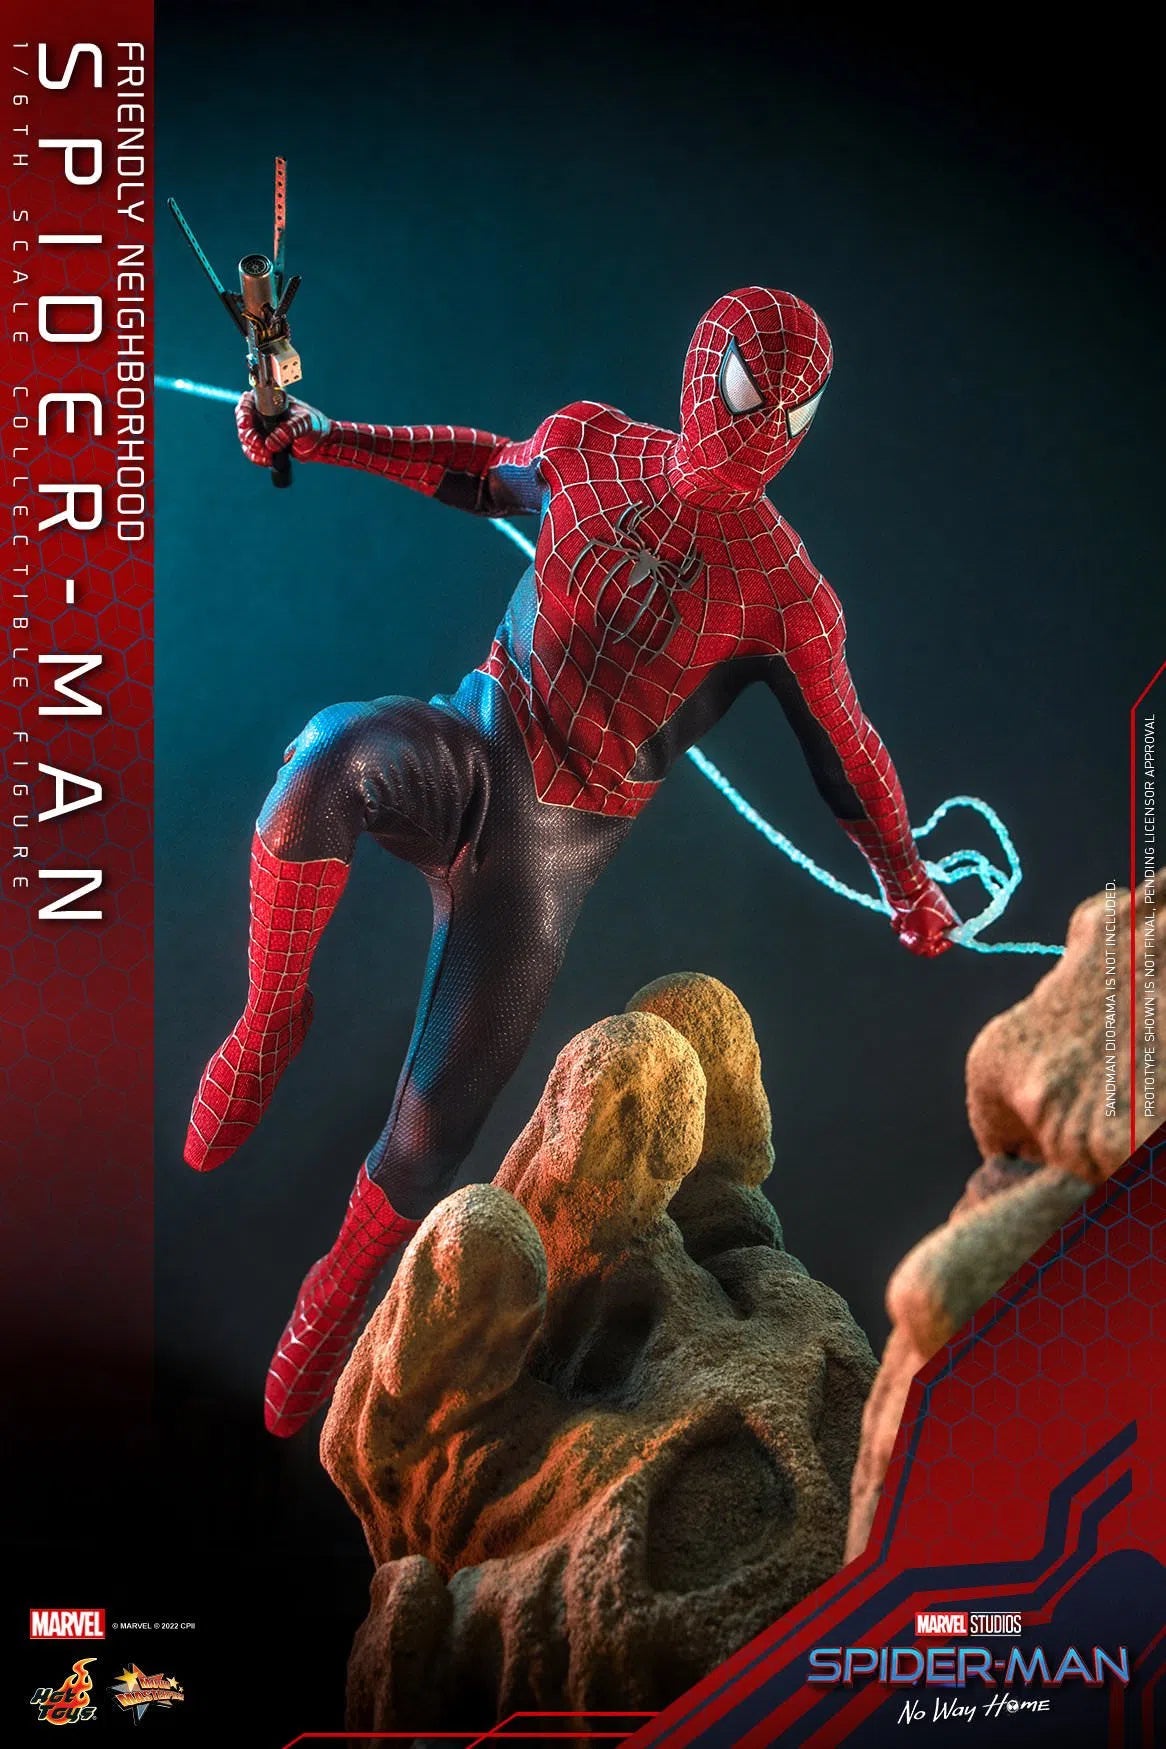 Friendly Neighborhood Spider-Man: Deluxe: Spider-Man No Way Home: MMS662: Hot Toys